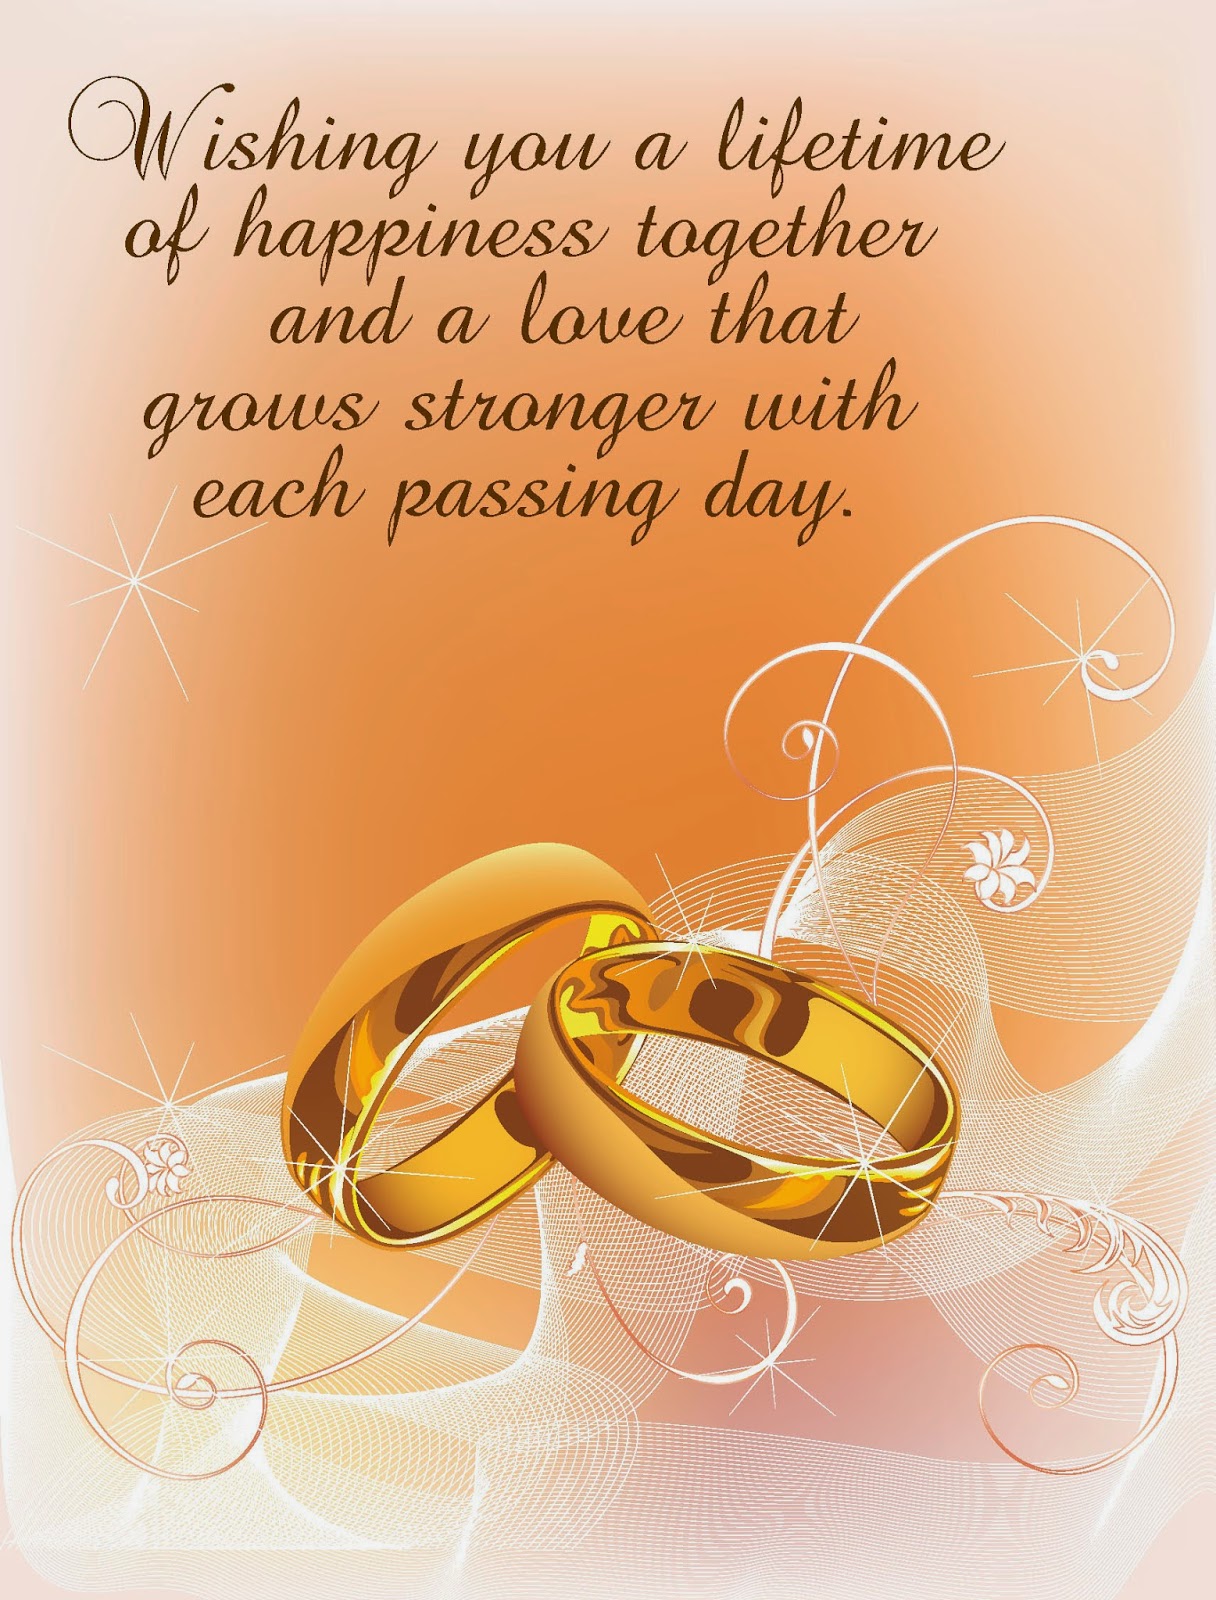 best wishes on your wedding day quotes